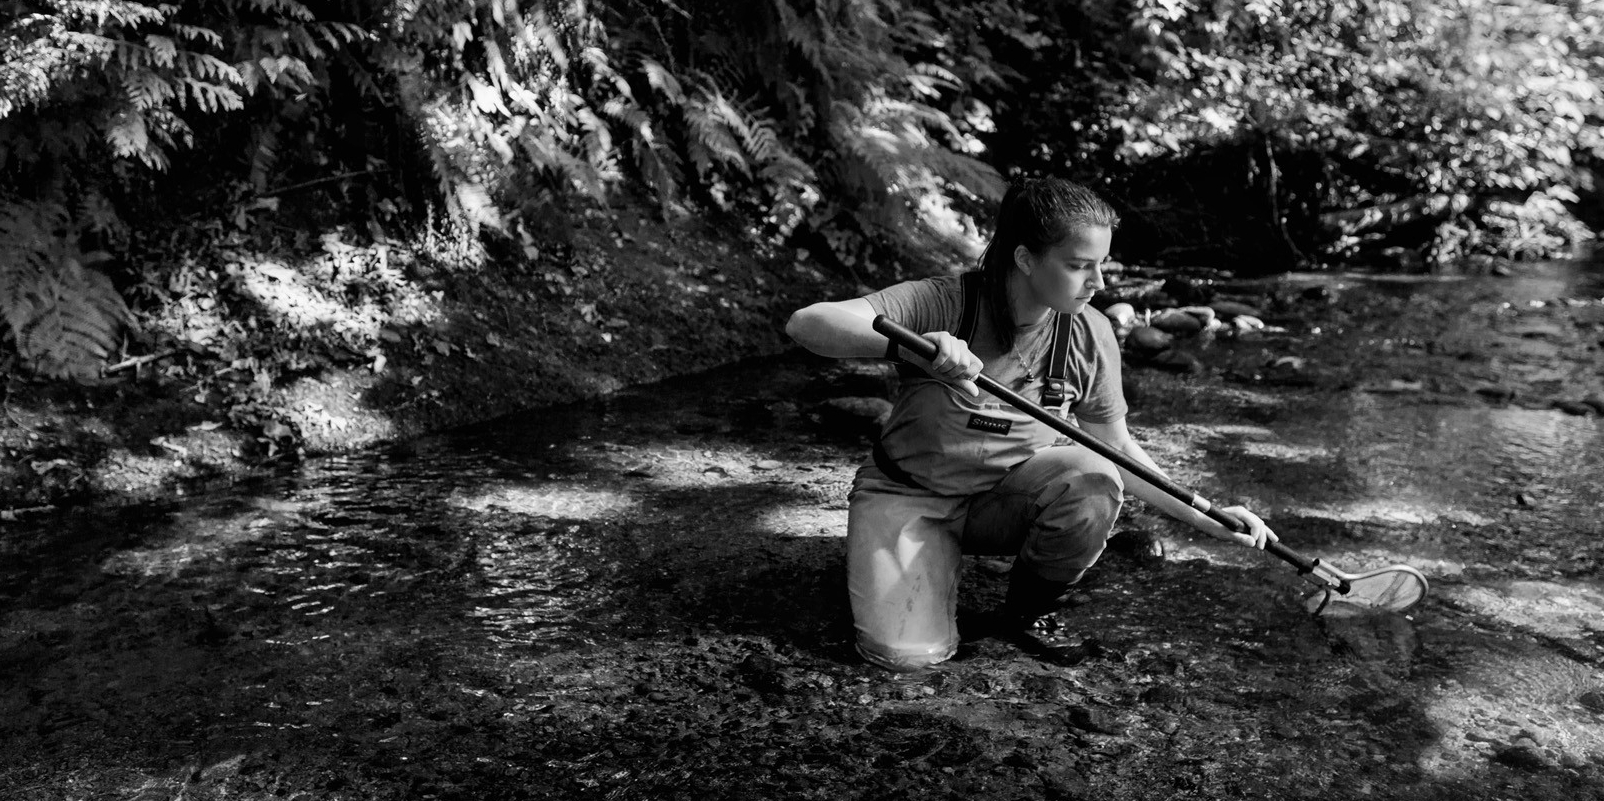 A researcher wearing waders and their hair in a long ponytail kneels on one knee in a creek, using a long net to collect samples. Behind them the creek embankment is thick with coastal rainforest flora.